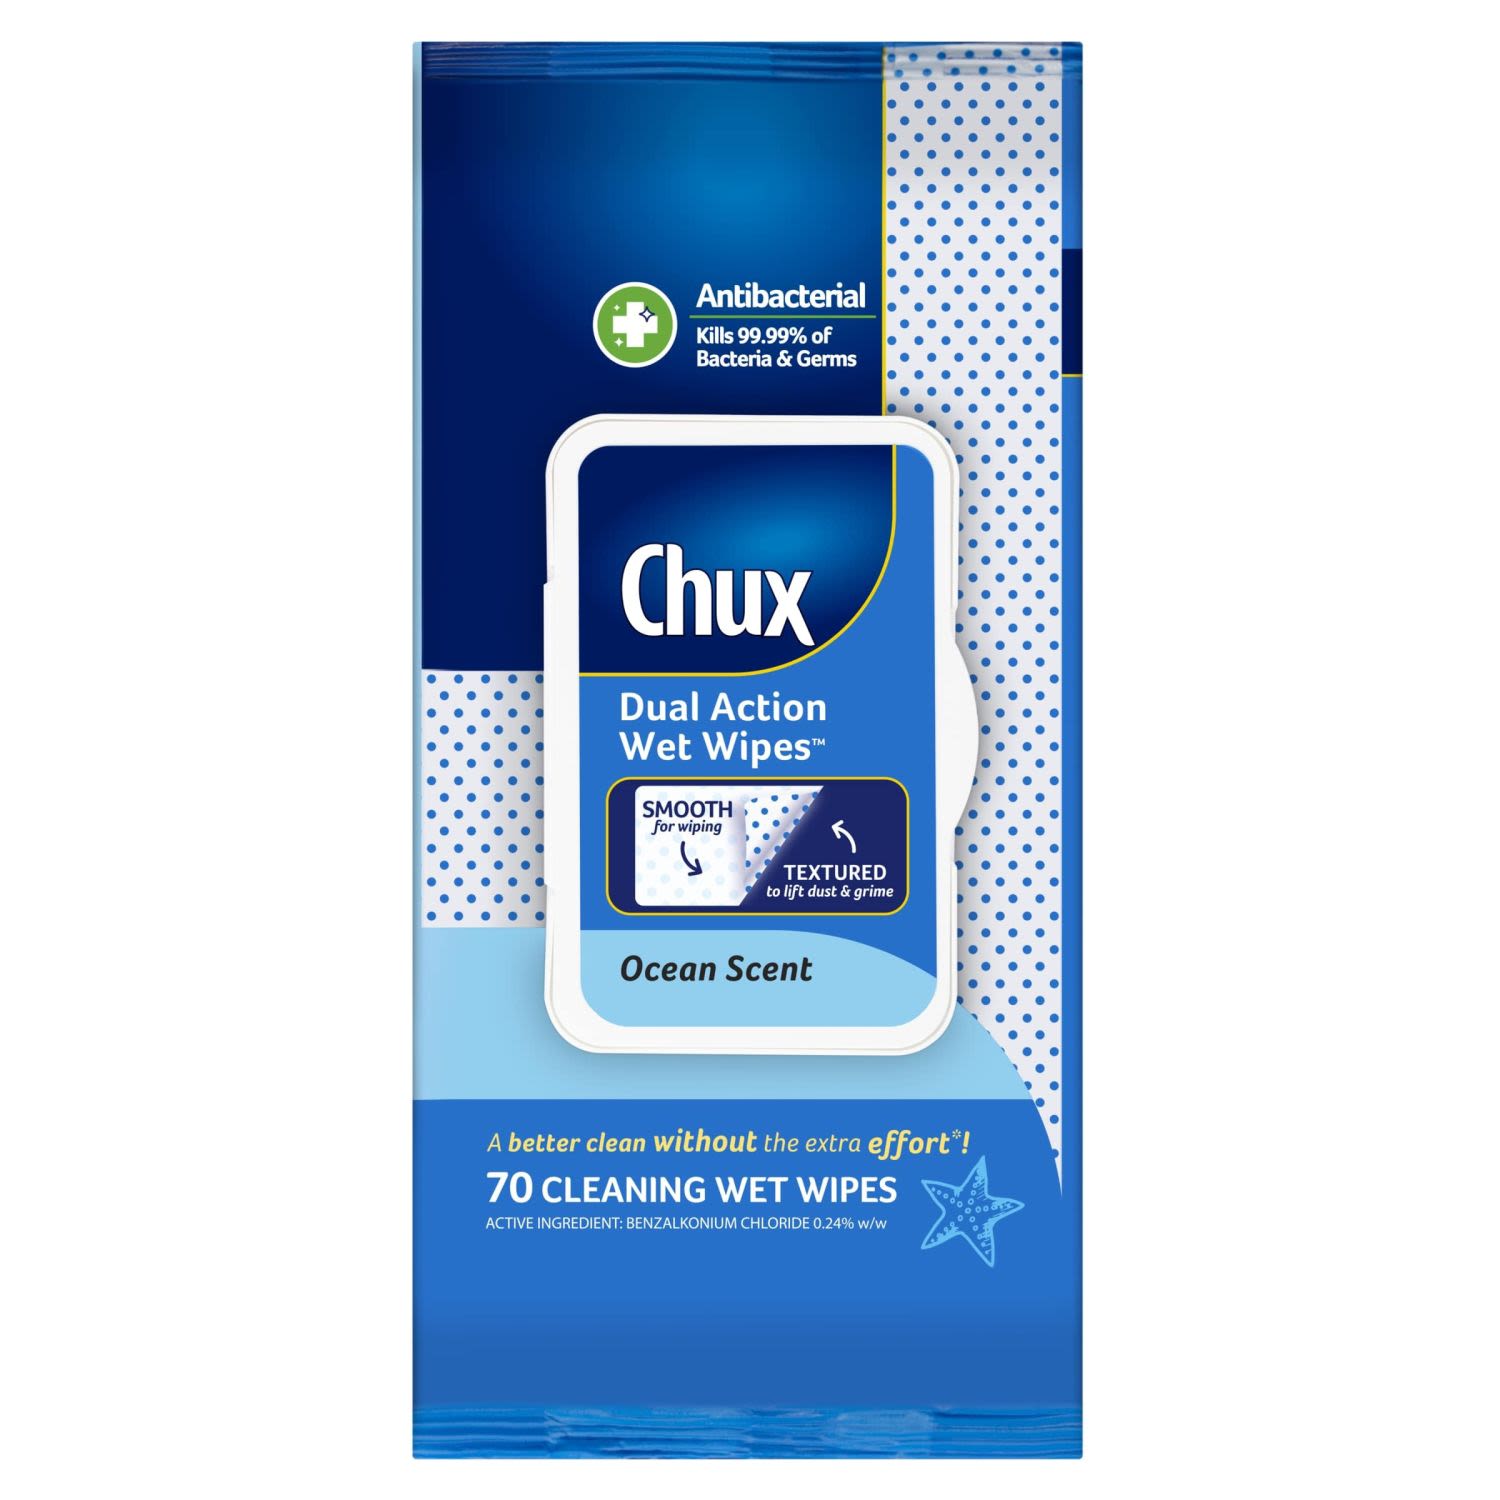 Chux Dual Action Wet Wipes Ocean Scent, 70 Each